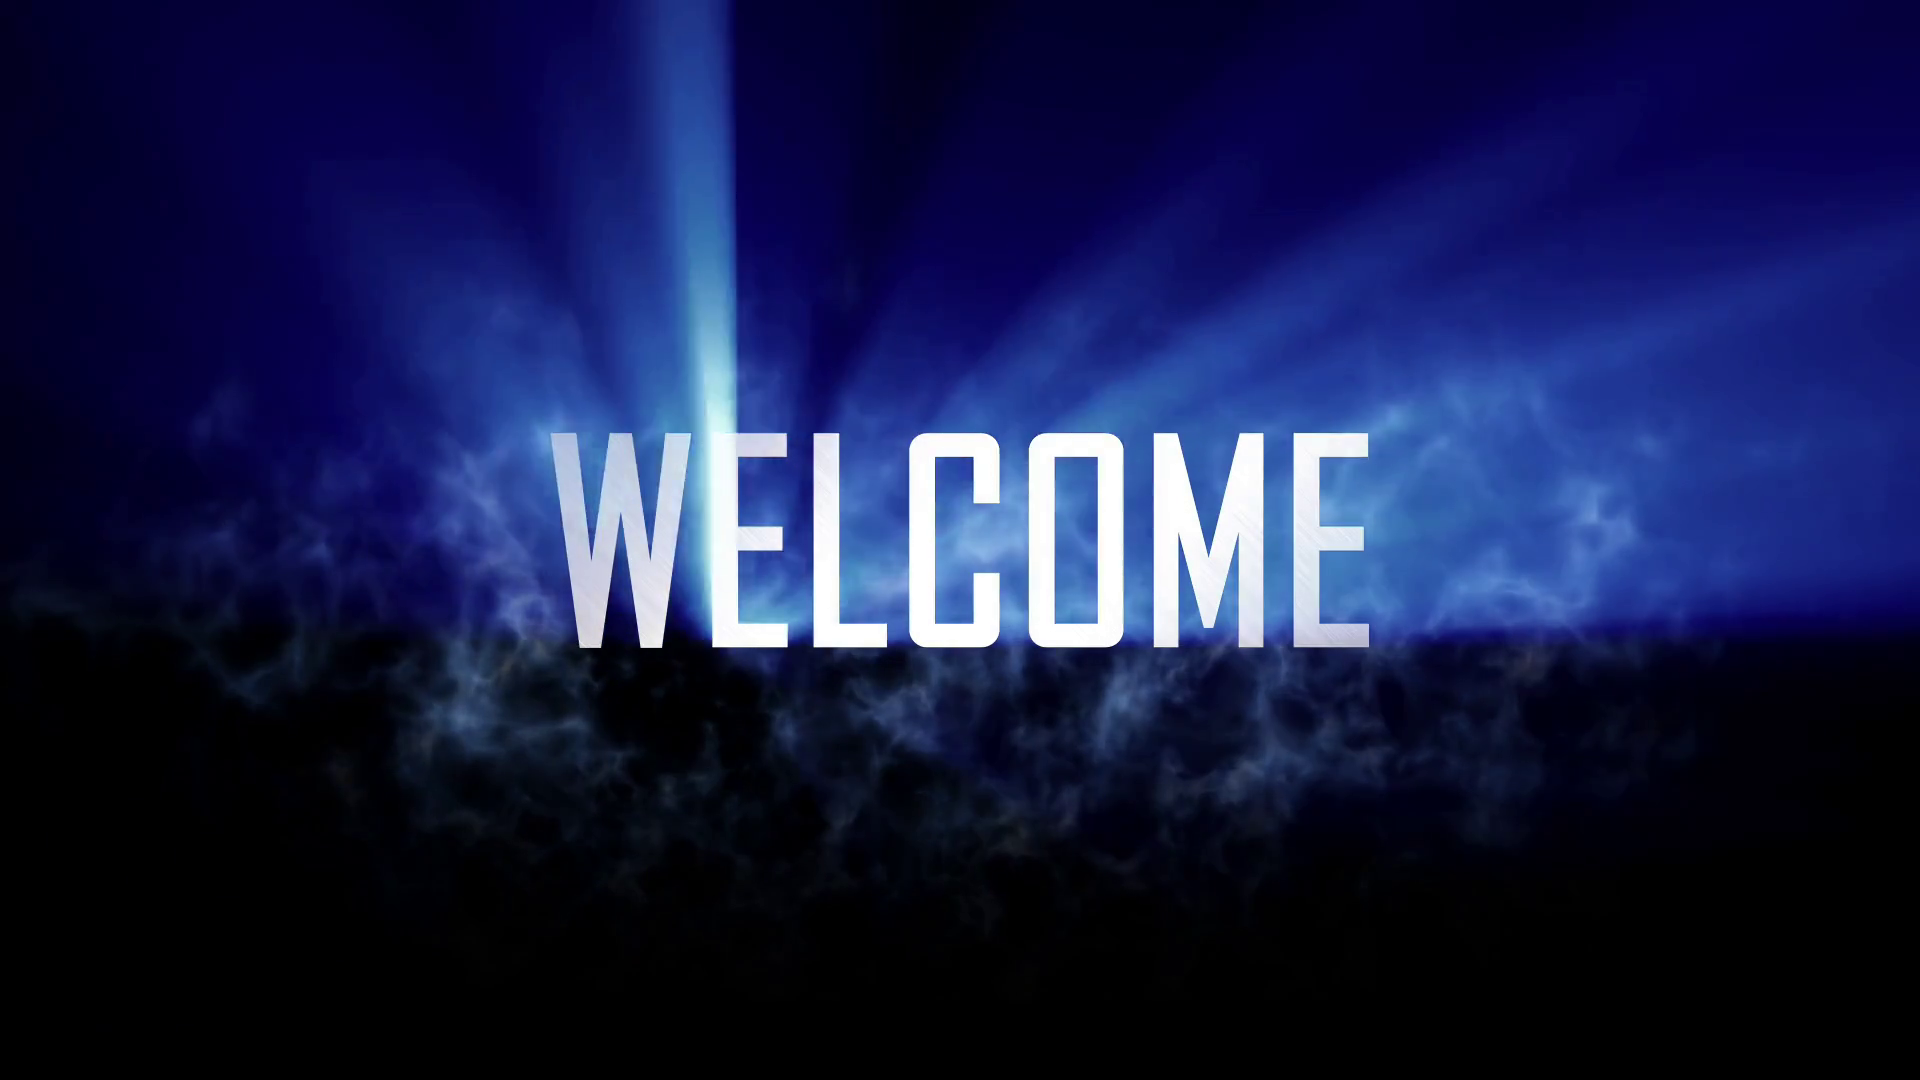 Welcome lettering on theme of night desktop backgrounds